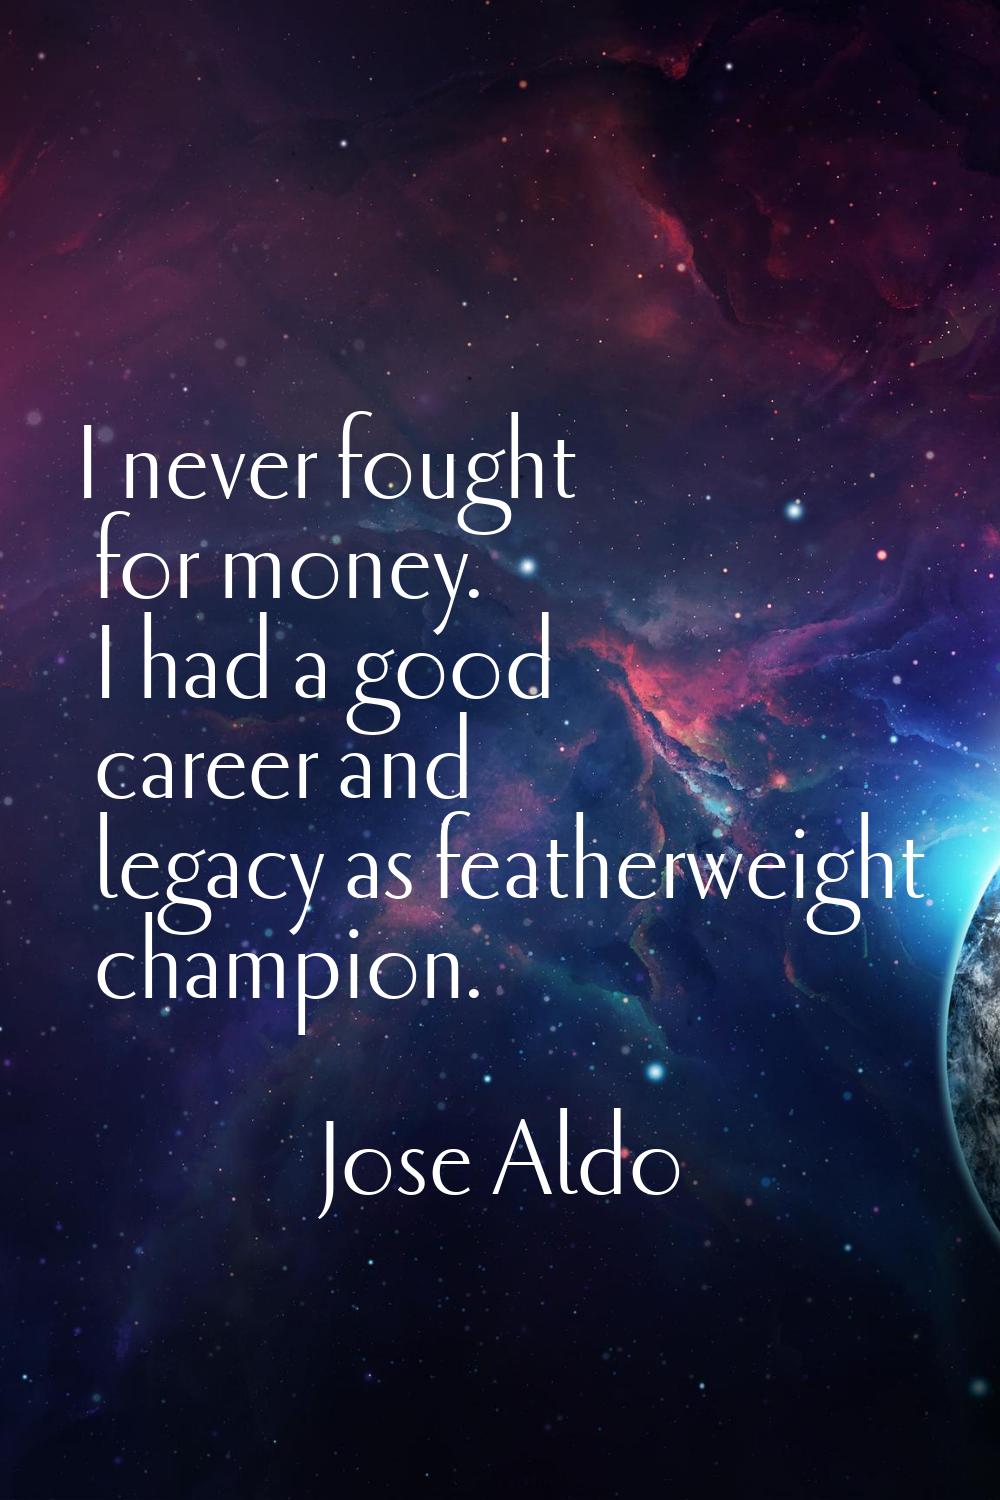 I never fought for money. I had a good career and legacy as featherweight champion.